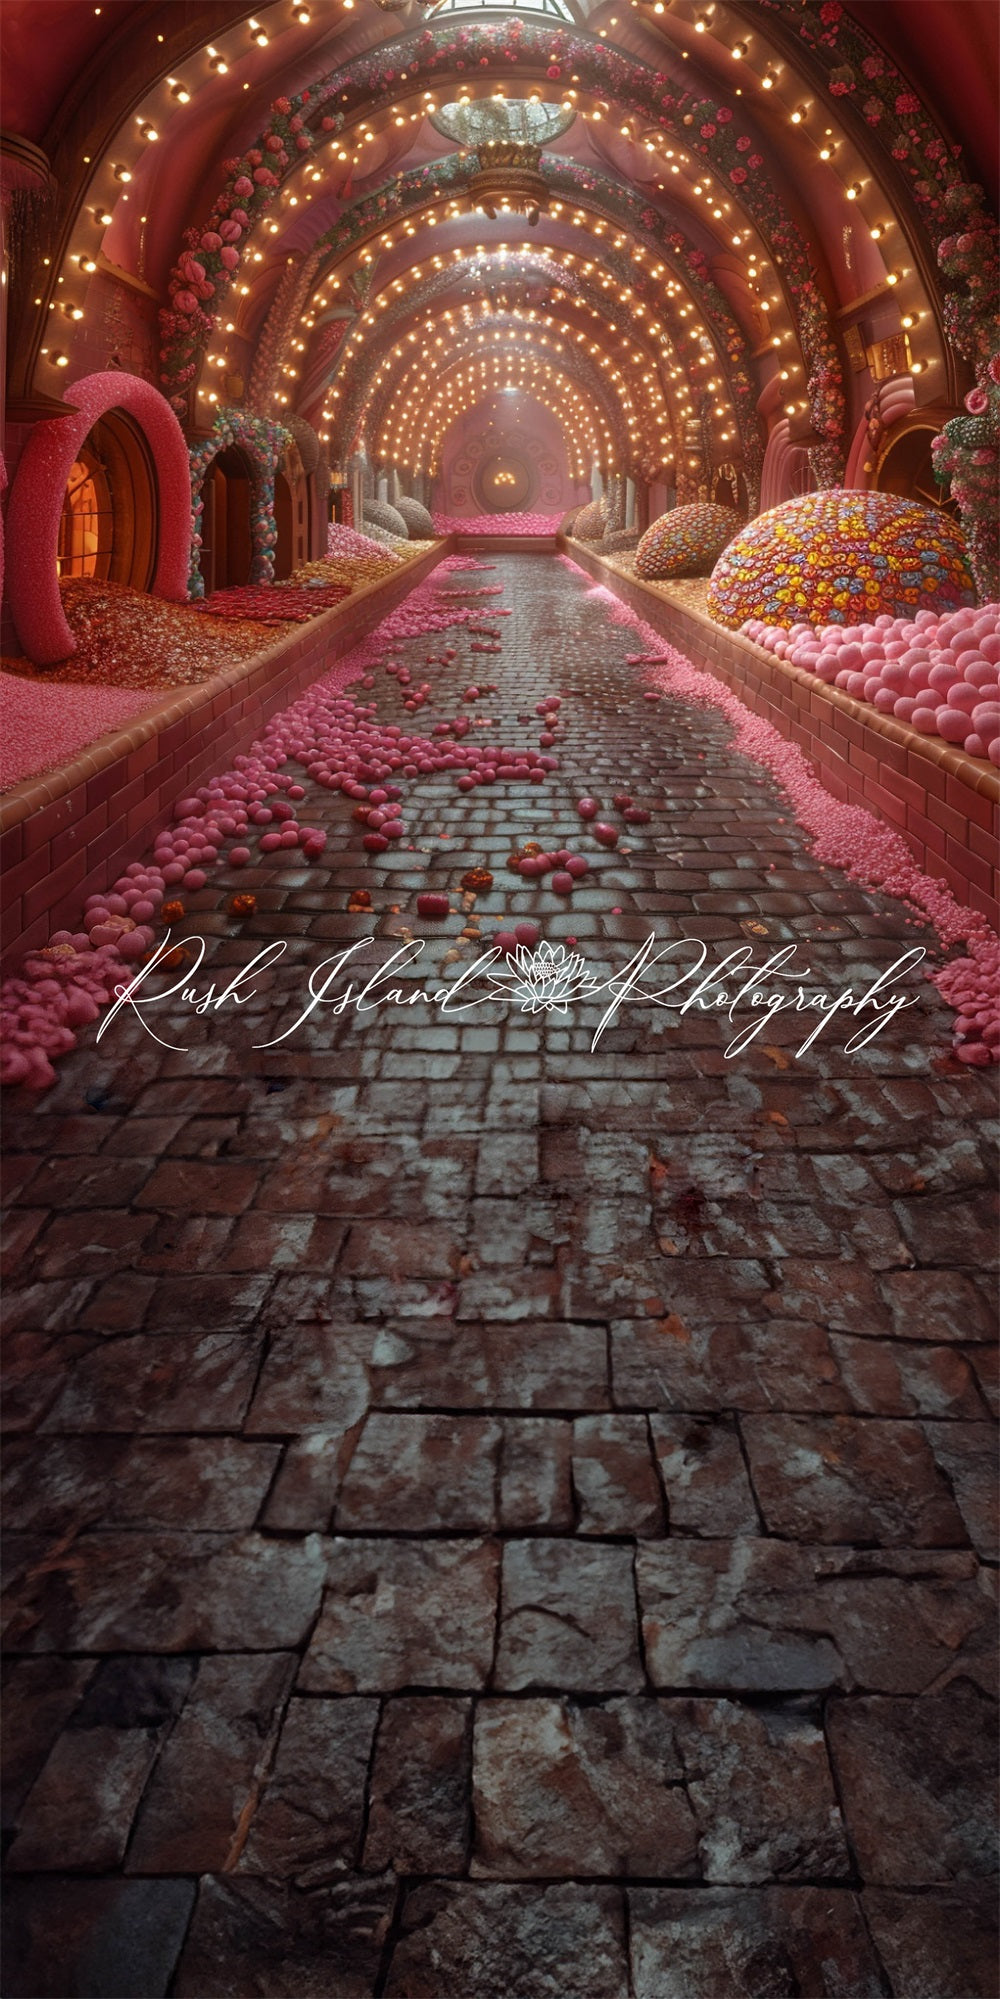 Kate Sweep Retro Pink Candy Colorful Flower Bokeh Black Brick Road Arched Cathedral Backdrop Designed by Laura Bybee